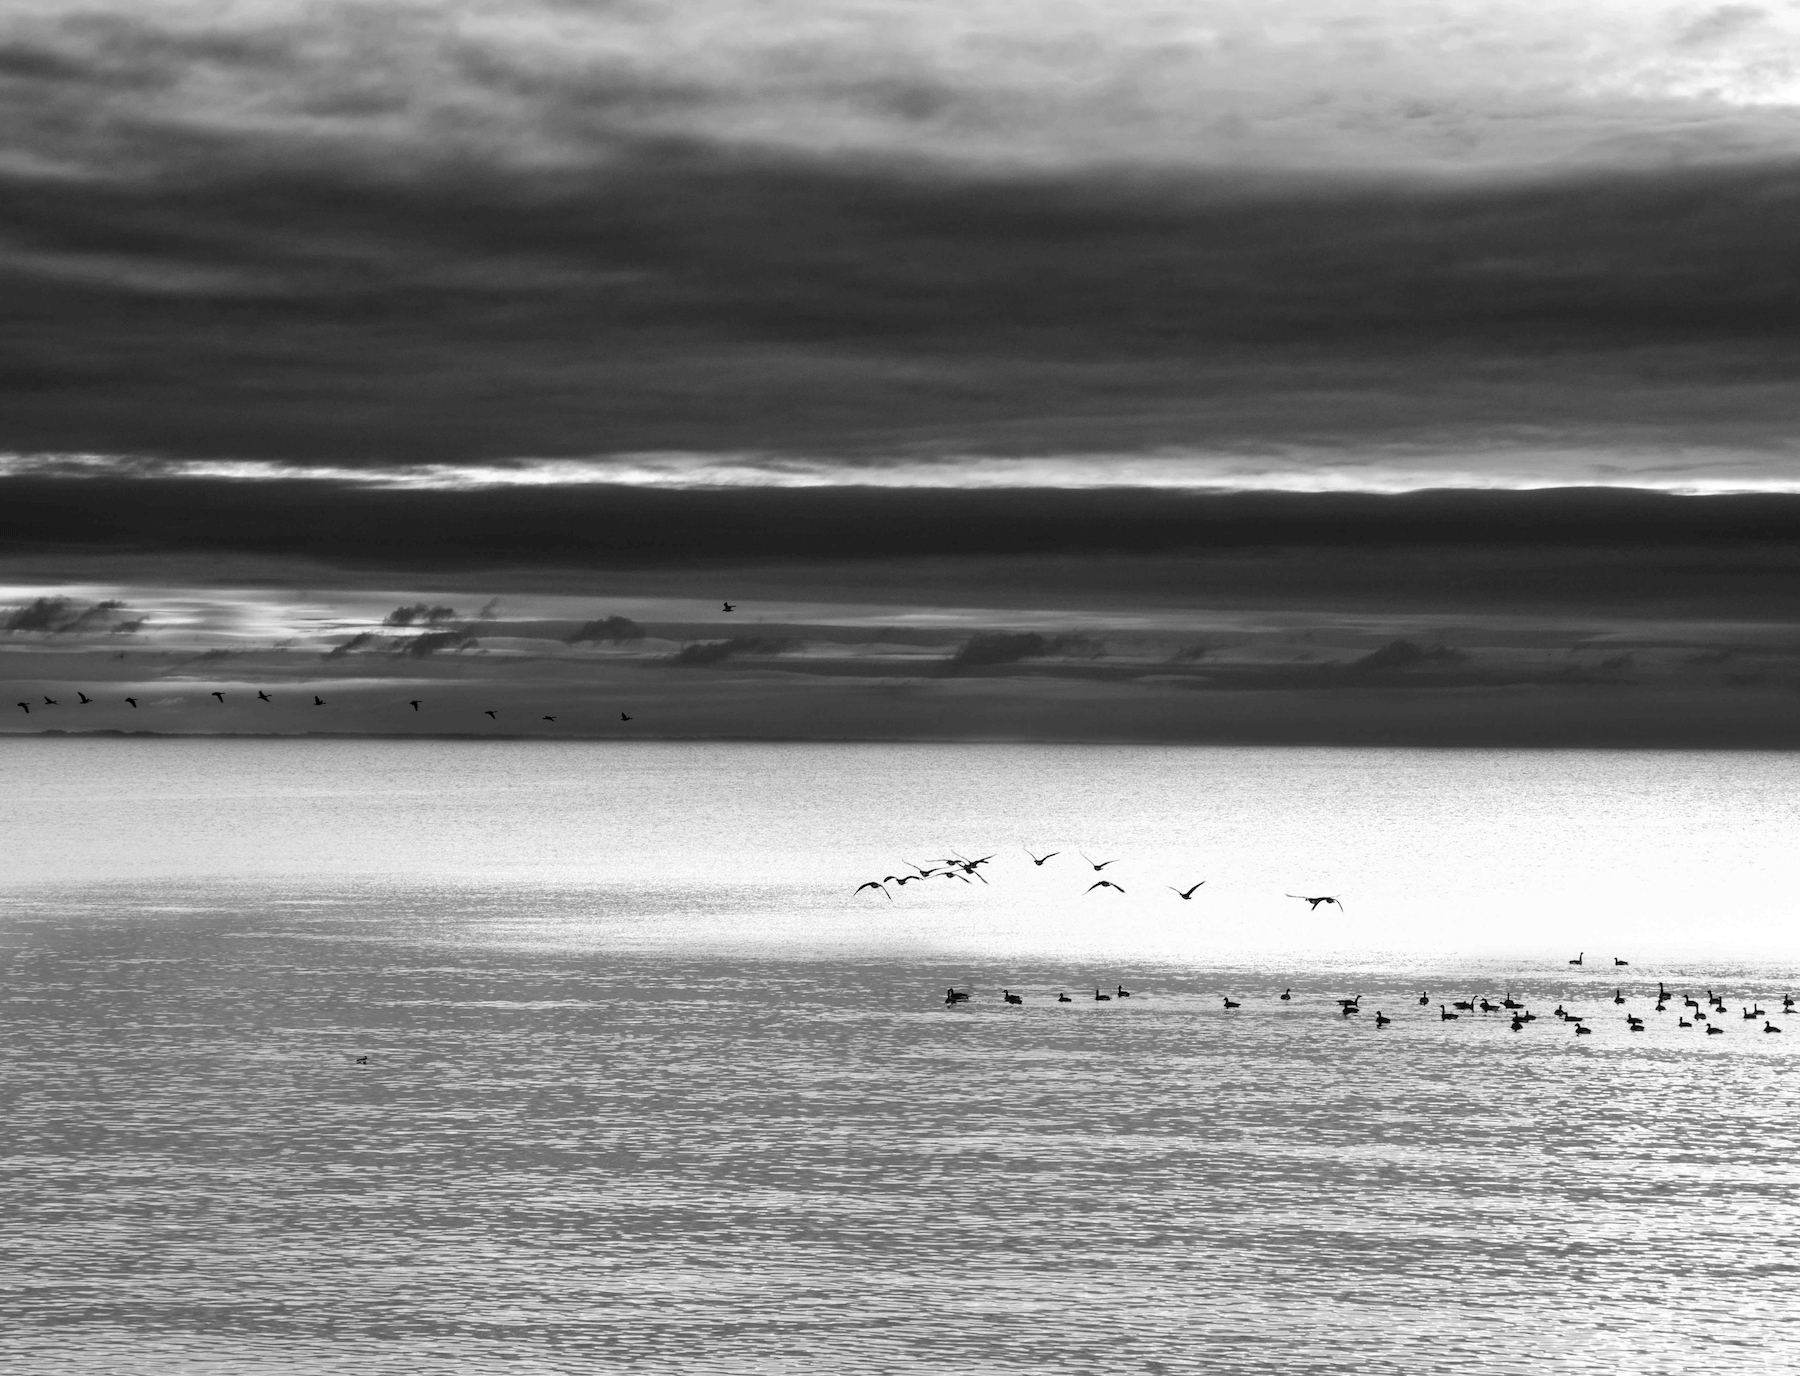 a flight of canada geese flying over lake erie with a dark overcast sky in the background.